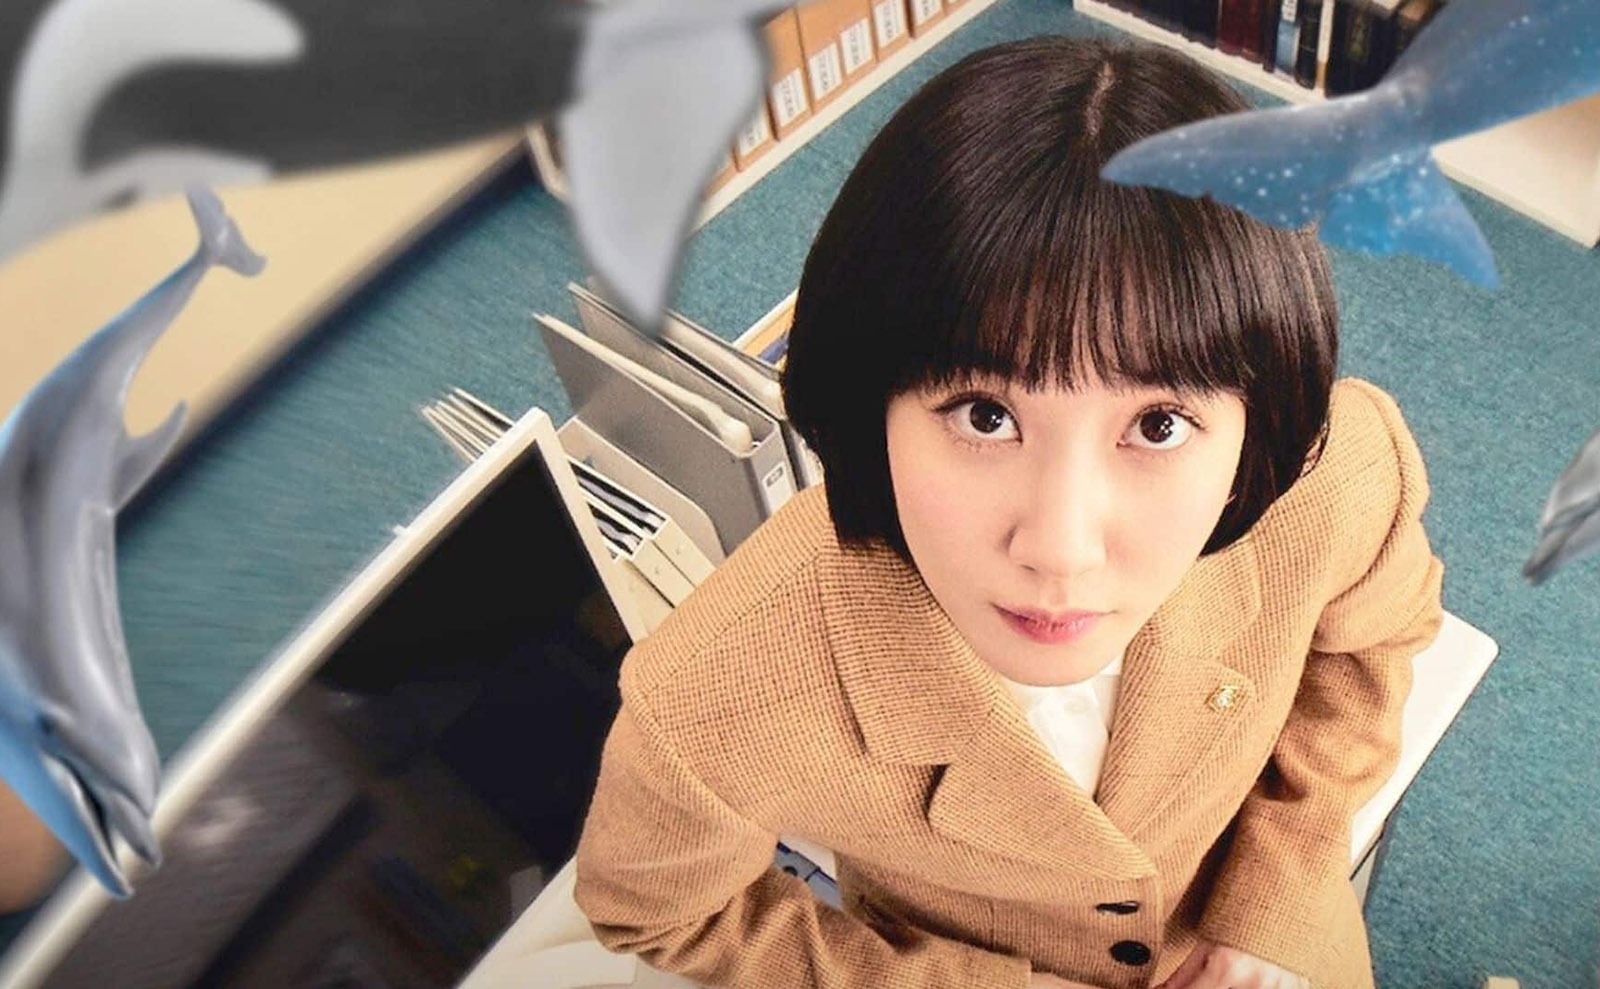 overhead image of south korean actress Park Eun Bin who portrays attorney woo looking up at the camera